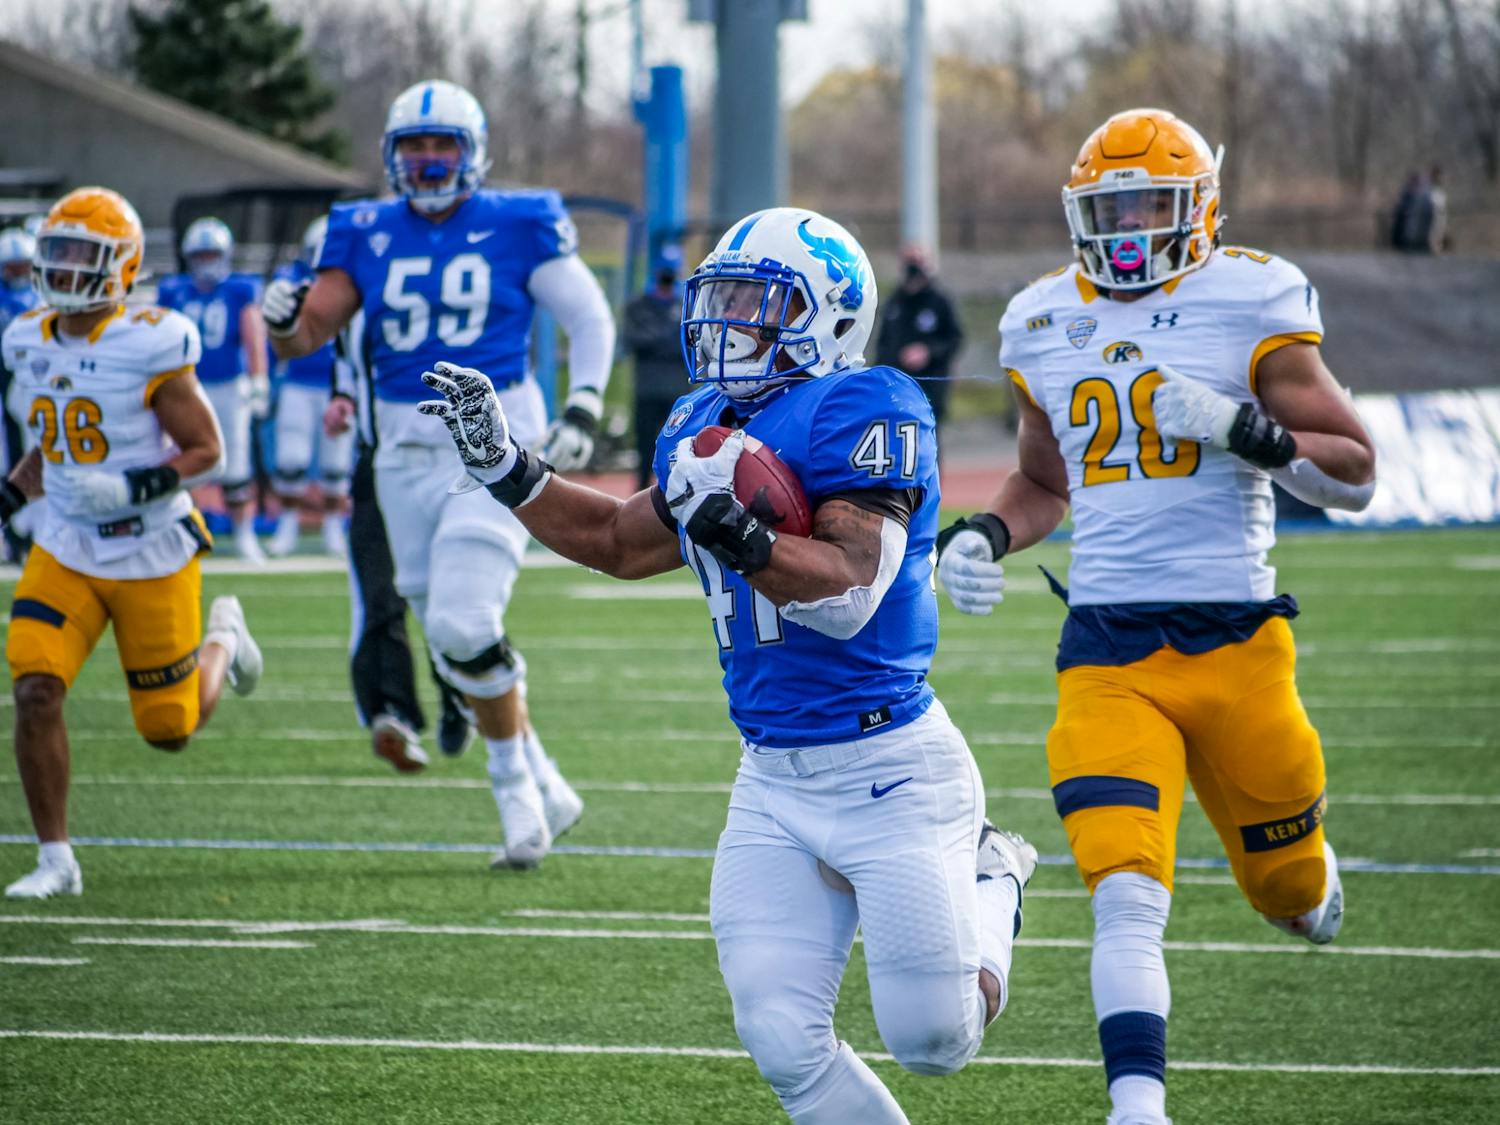 UB running back Jaret Patterson (41) rushed for 409 yards and eight touchdowns in a 70-41 victory over the Kent State Golden Flashes Saturday.